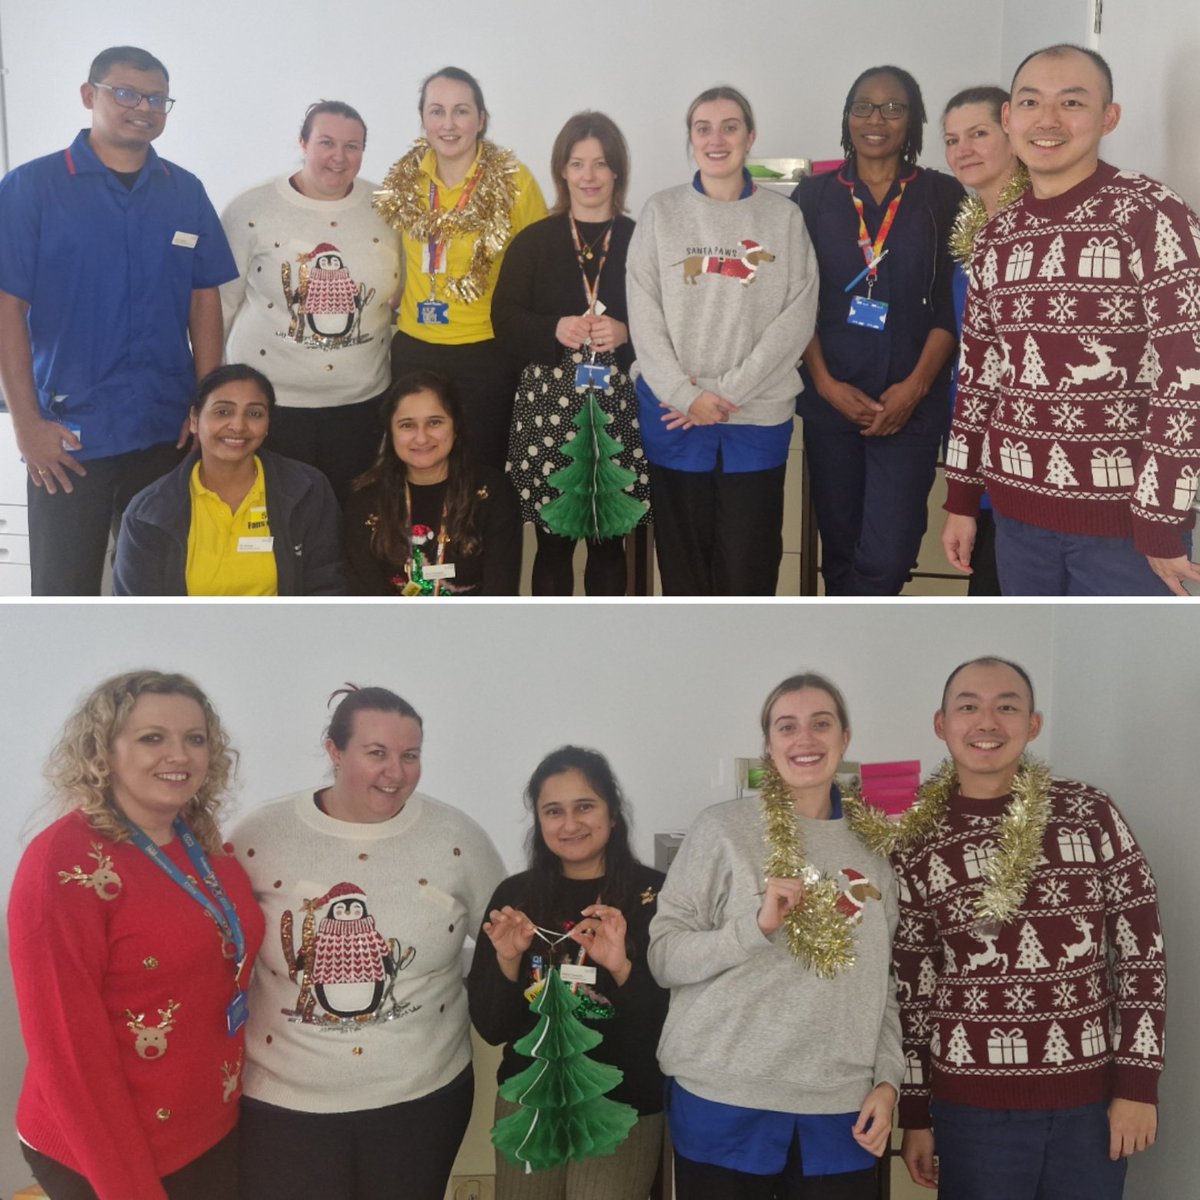 Today we are celebrating #ChristmasJumperDay at @WestHertsNHS 🎄🎁